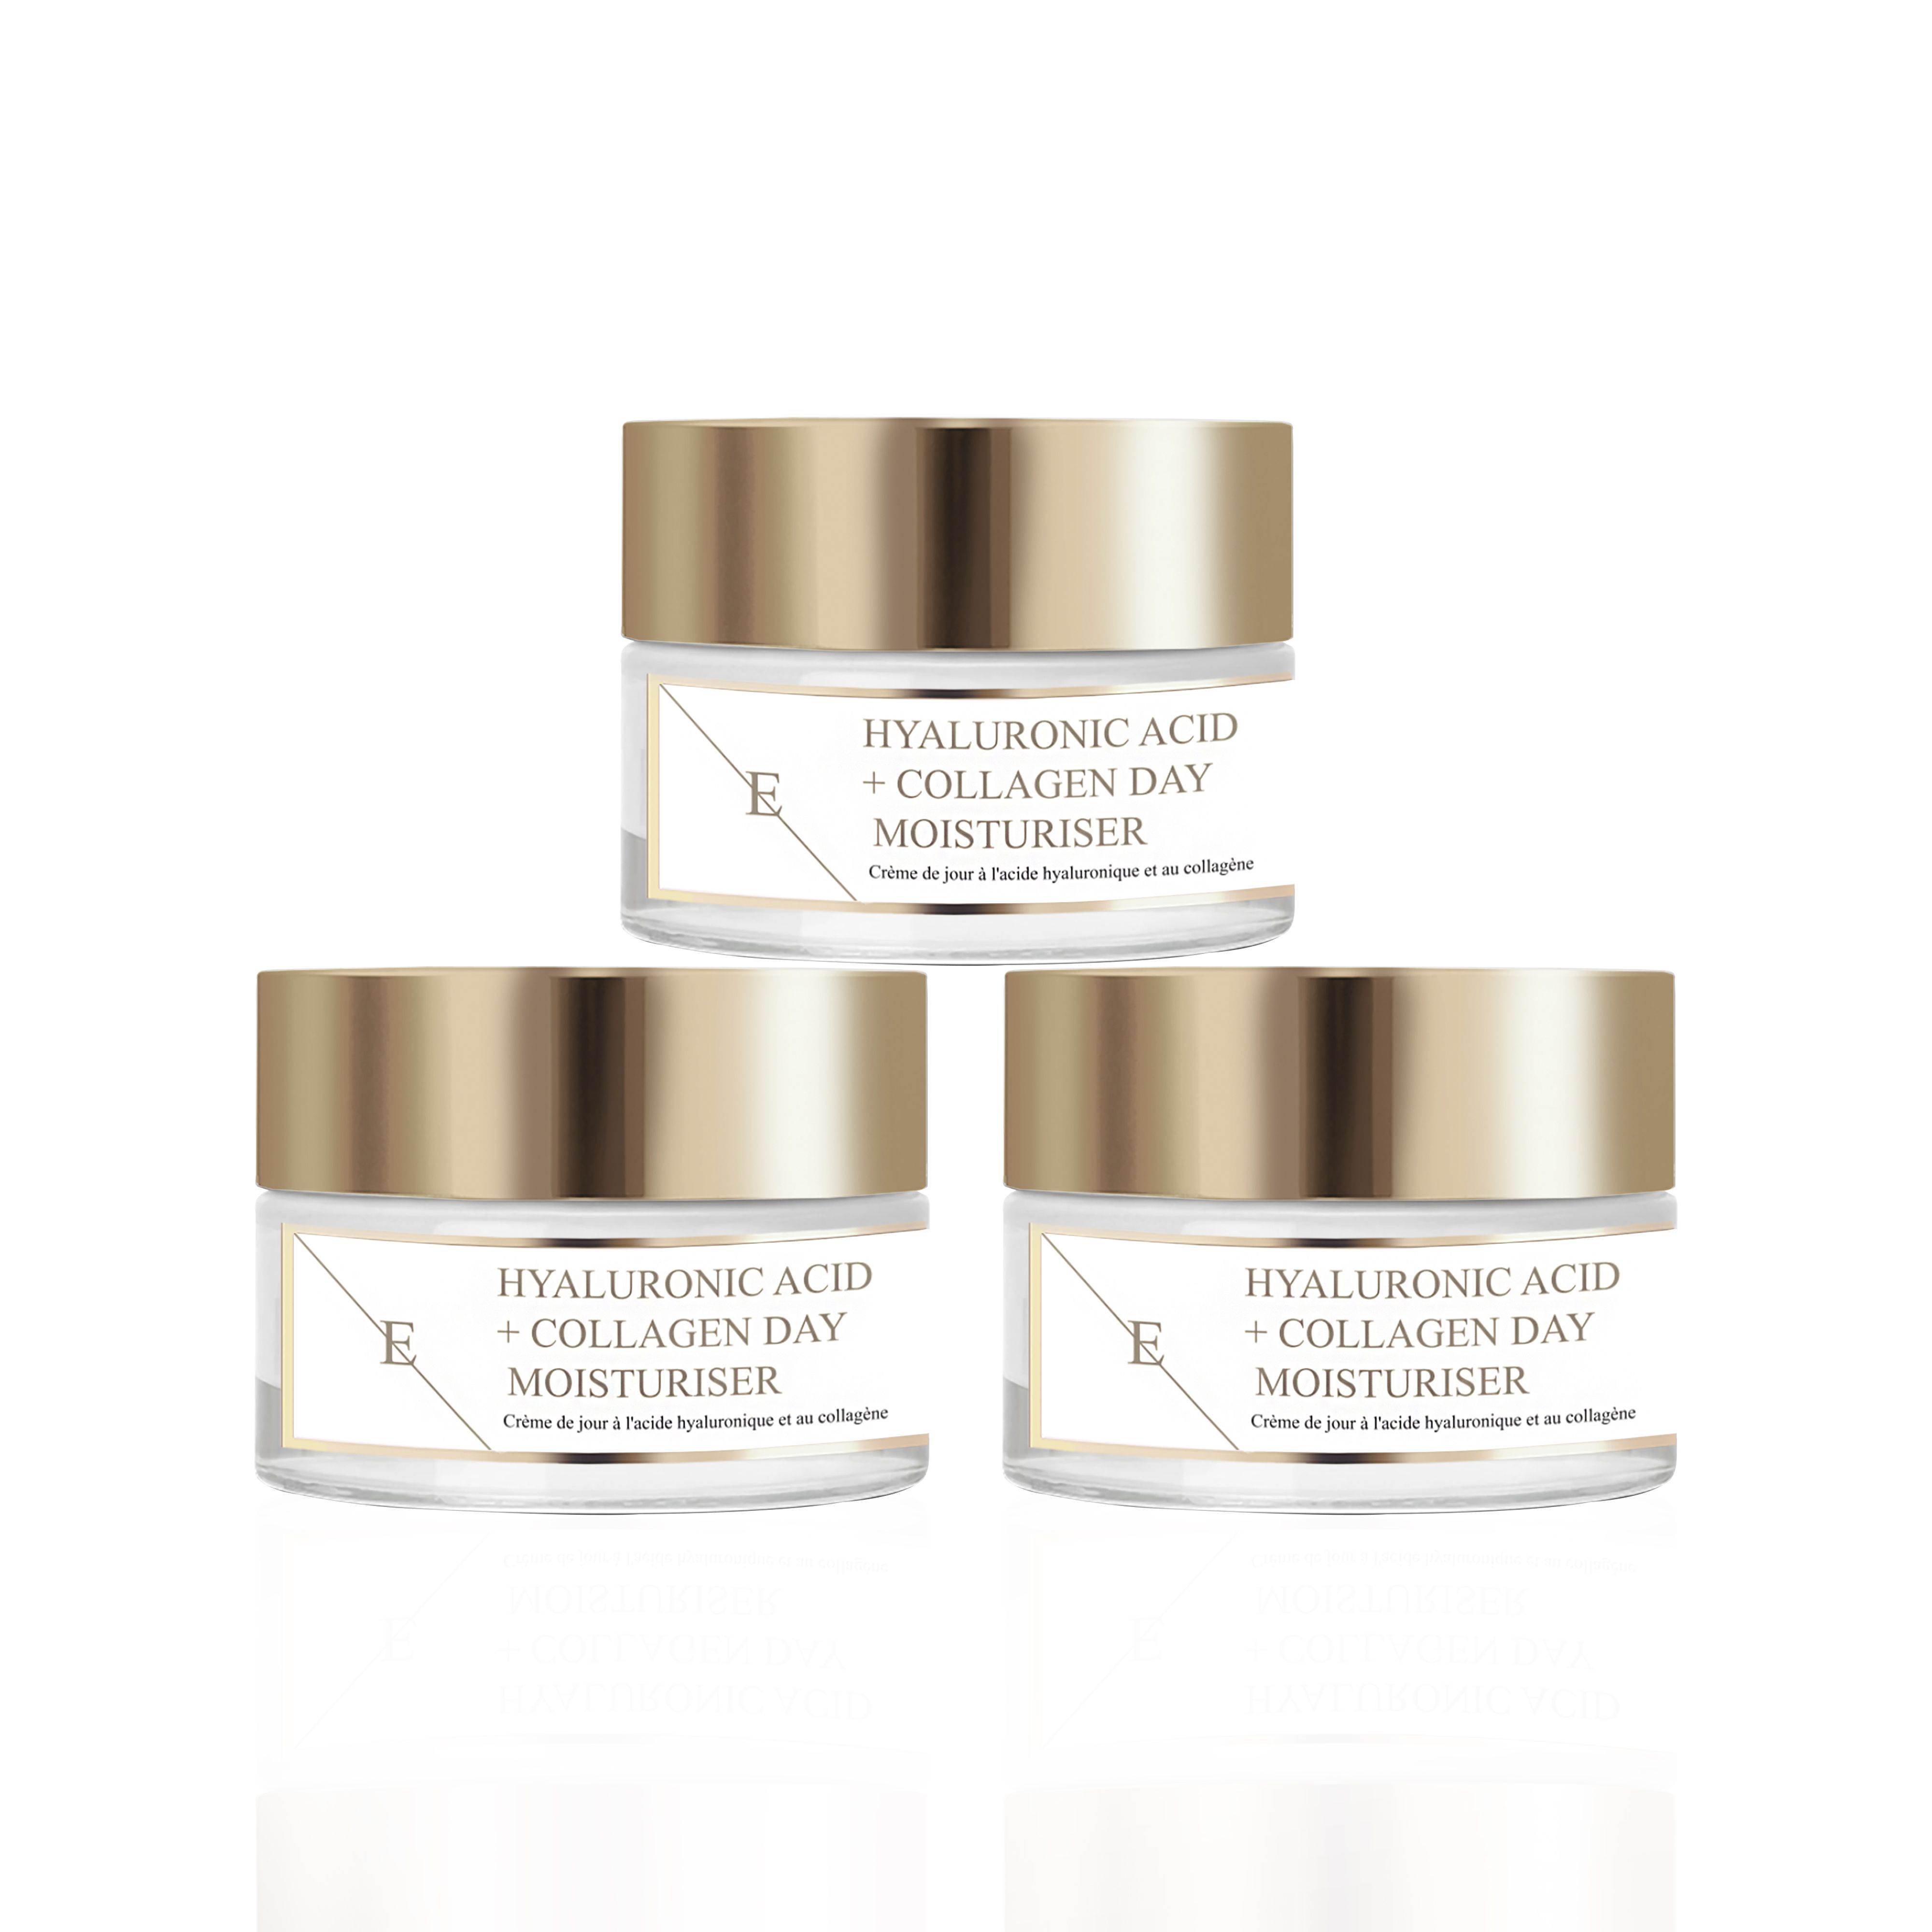 3 x HYALURONIC ACID AND COLLAGEN DAY CREAM 50ml

This anti-ageing day cream contains hydration boosting Hyaluronic Acid and Collagen Amino acids. The cream aims to smoothen the look of dehydration lines for youthful plump and nourished looking complexion.

Key Ingredients:

HYALURONIC ACID
Hyaluronic Acid is naturally found in our skin, as we age our body's natural production of hyaluronic acid slows down. Hyaluronic acid is a key element making the skin looking plump and youthful as it hold moisture 1000 times its own weight. Our hyaluronic acid is called Sodium Hyaluronate and it is smaller size of hyaluronic acid that is able to penetrate and hydrate more deeper levels of the skin than normal hyaluronic acid.

COLLAGEN AMINO ACIDS
Collagen is naturally found in our skin and as we age the production of collagen slows down. As an skincare ingredient collagen aims to boost plumpness and the look of the skin by bringing moisture and hydration to the skin.

SWEET ALMOND OIL
Sweet almond oil is high in natural fatty acids and it nourishes and keeps skin moisturised.

GREEN TEA LEAF EXTRACT
Green tea leaf extract is powerful antioxidant that protects the skin from free radical damage and so aims to contribute to prevention of the signs of premature ageing.

PROVITAMIN B5
Provitamin B5 aims to retain and preserve moisture. Provitamin B5 protects the skinâ€™s barrier and helps the skin to retain its moisture levels and shield it from irritation. By applying a product with Provitamin B5, you will maximise your skinâ€™s hydration while improving its softness and elasticity.

Directions for use: Apply pea-sized amount of the cream on cleansed face, neckline and neck in the morning.